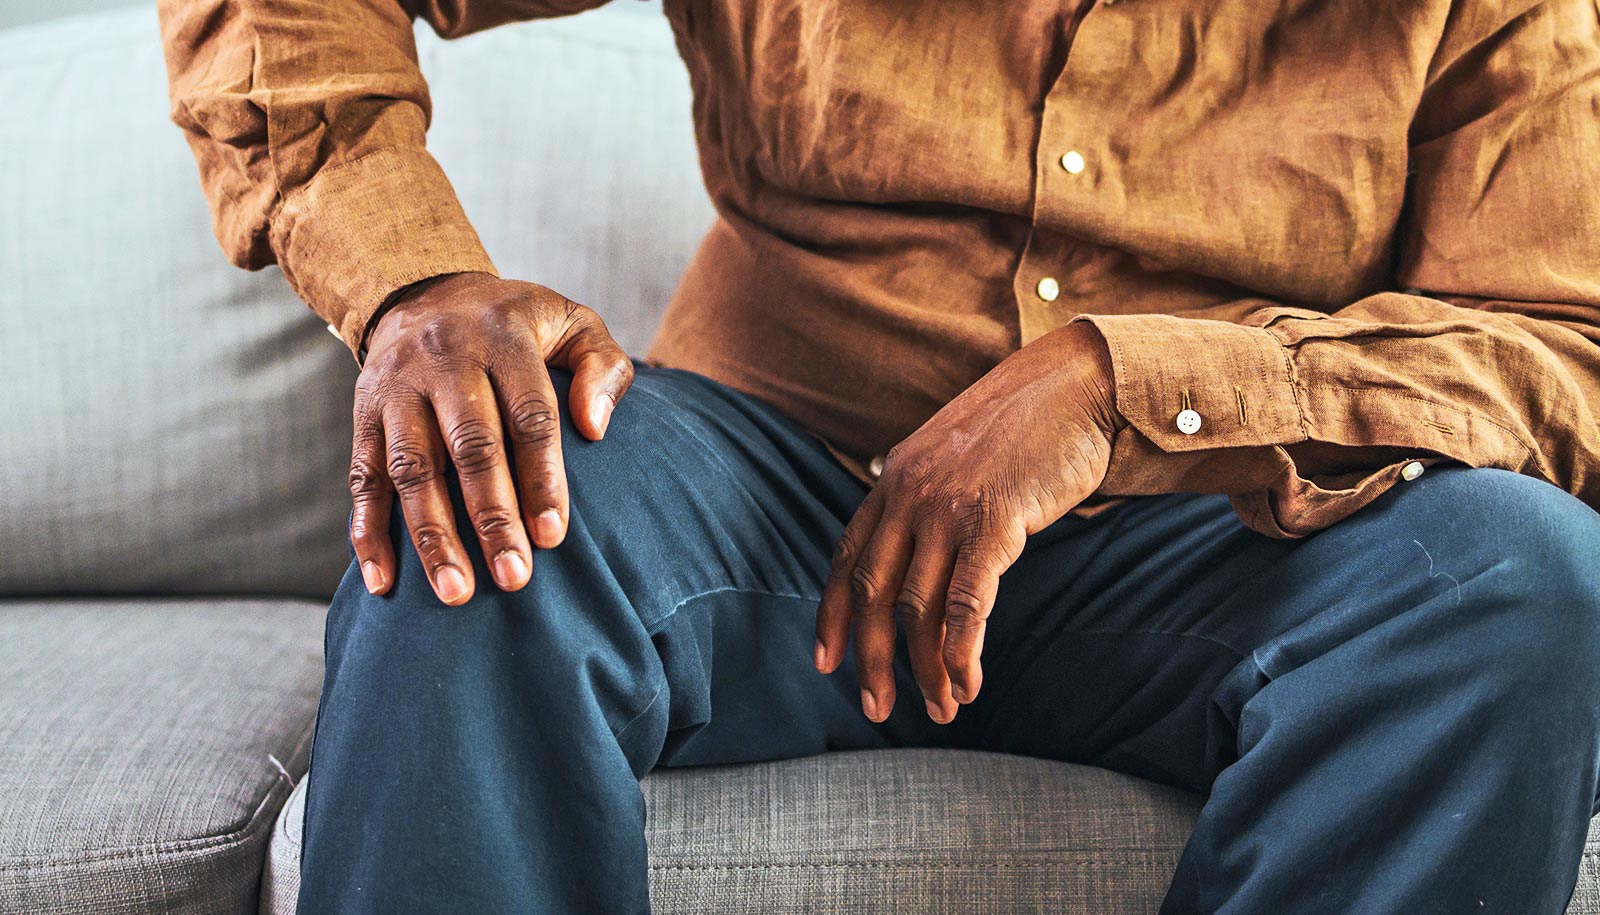 An older man sitting on a couch holds his knee with one hand.